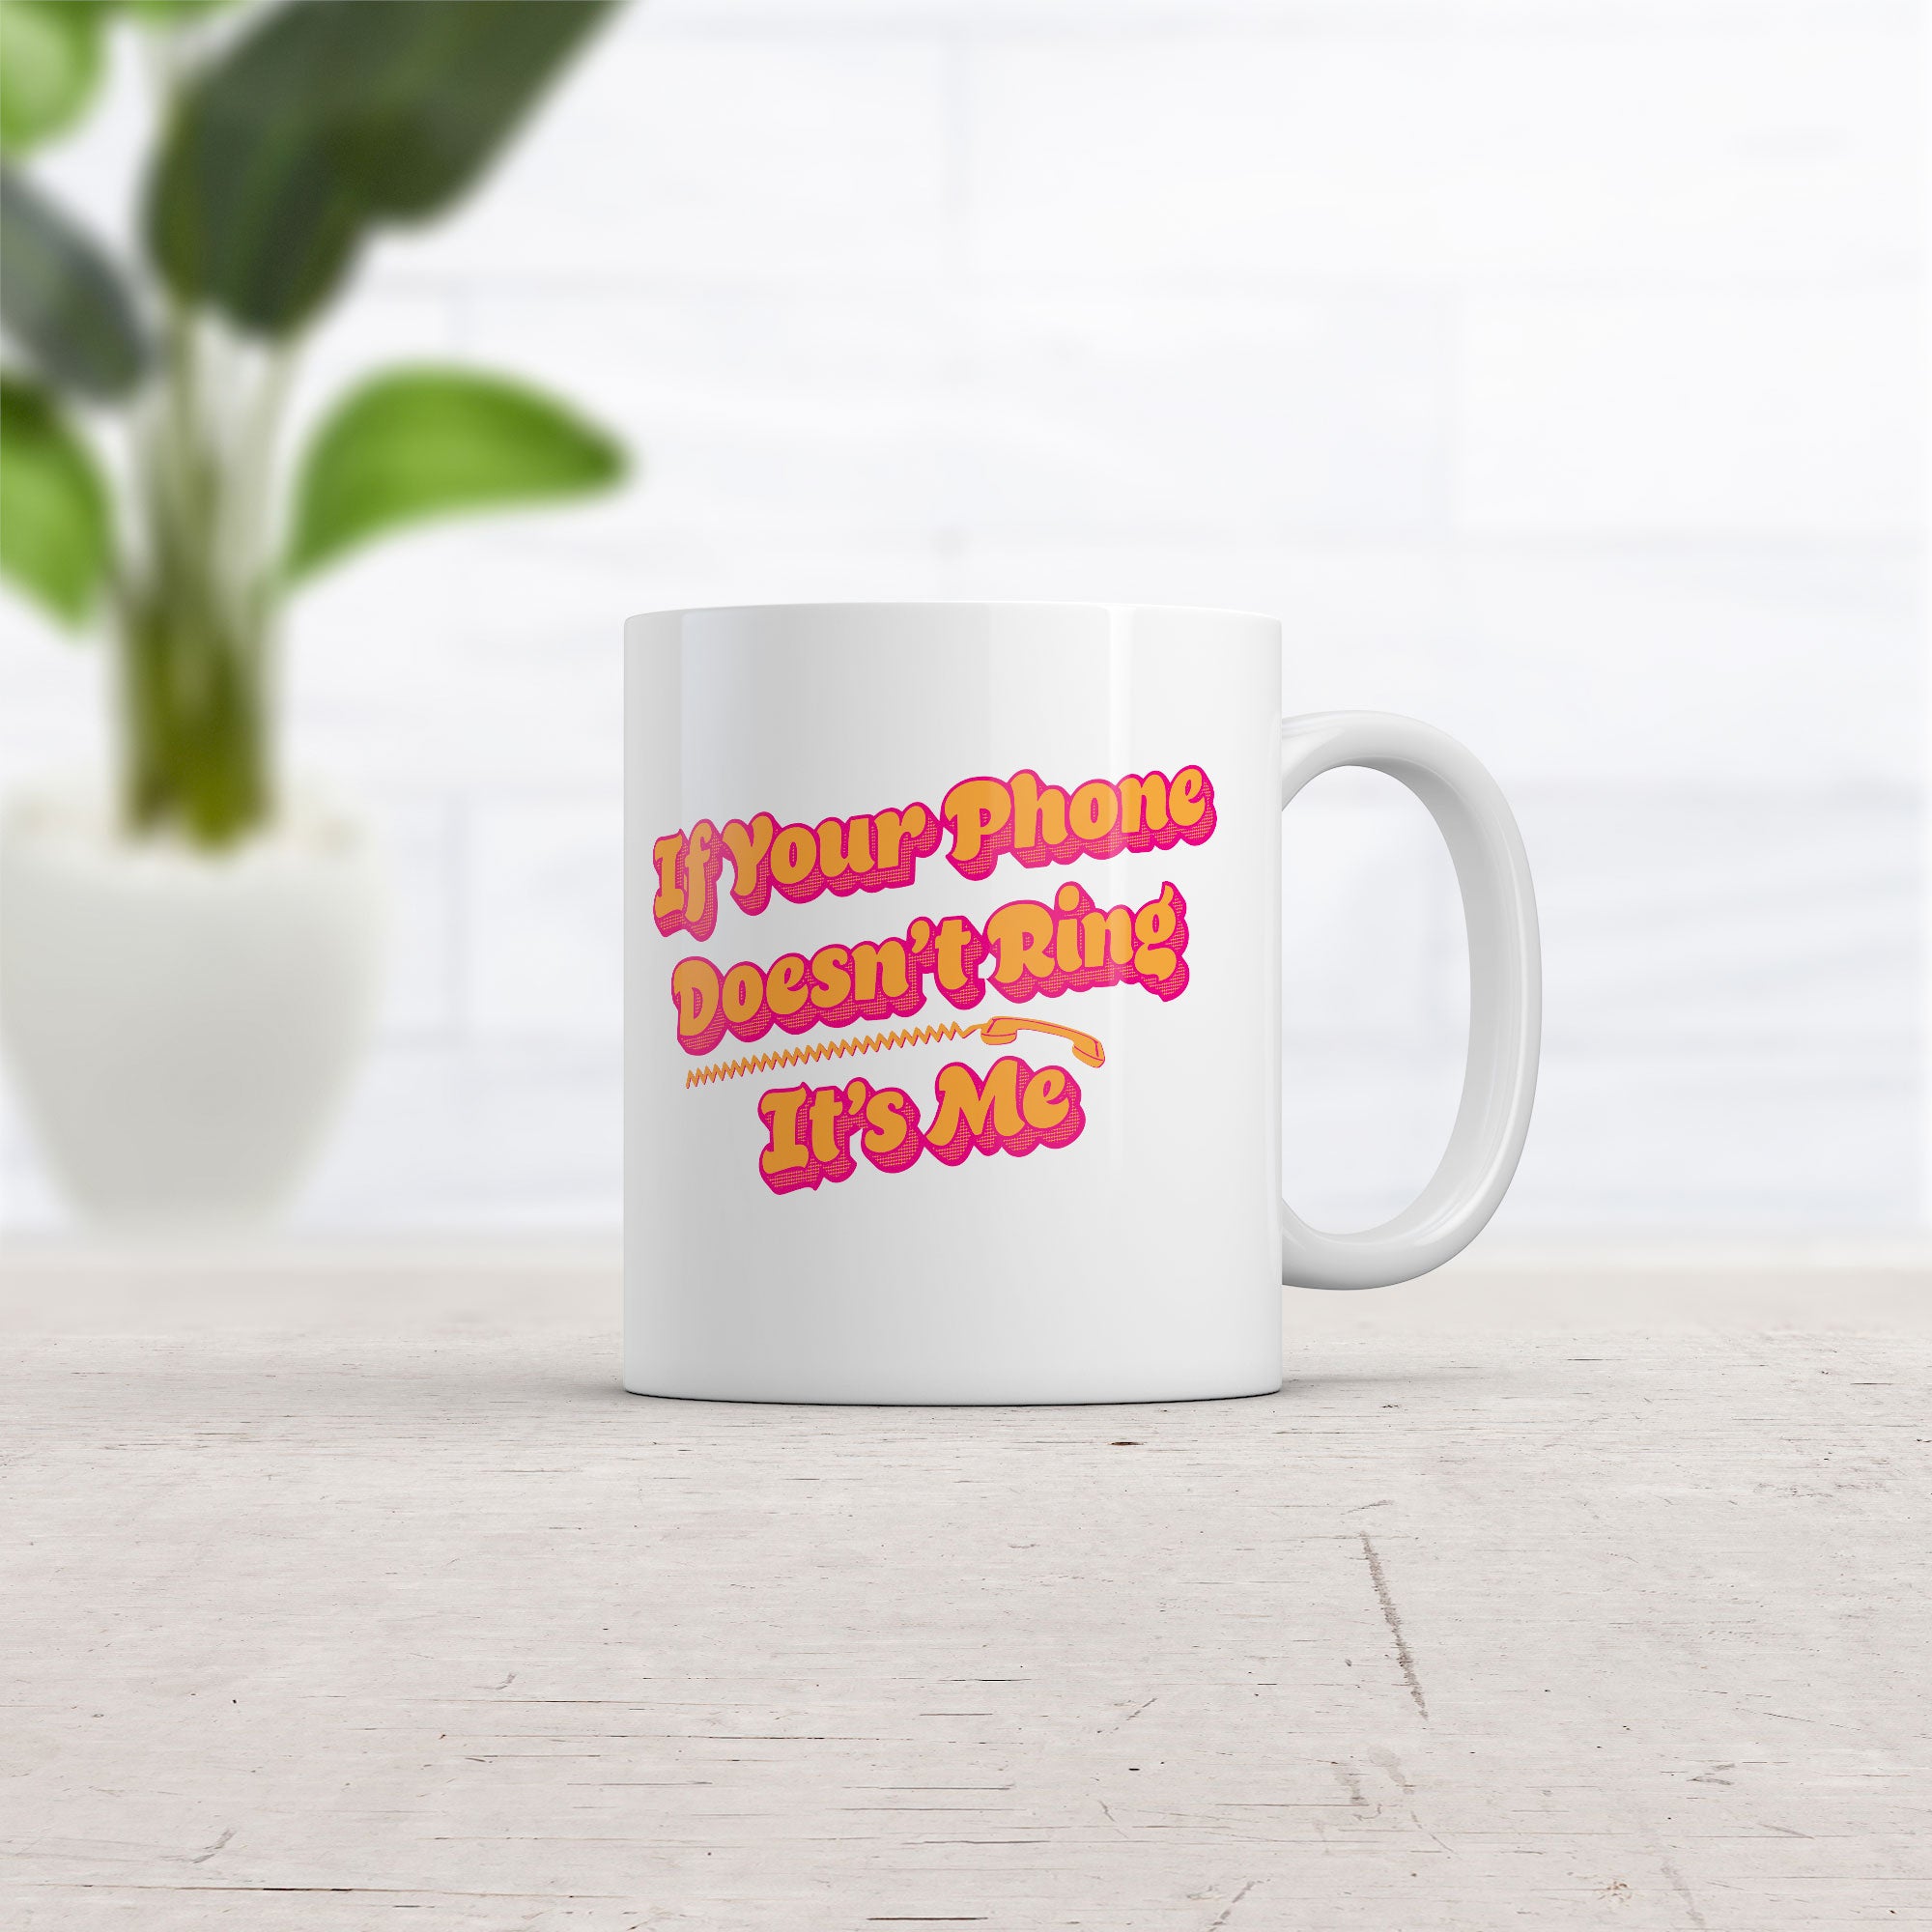 Funny White If Your Phone Doesnt Ring Its Me Coffee Mug Nerdy Sarcastic Tee